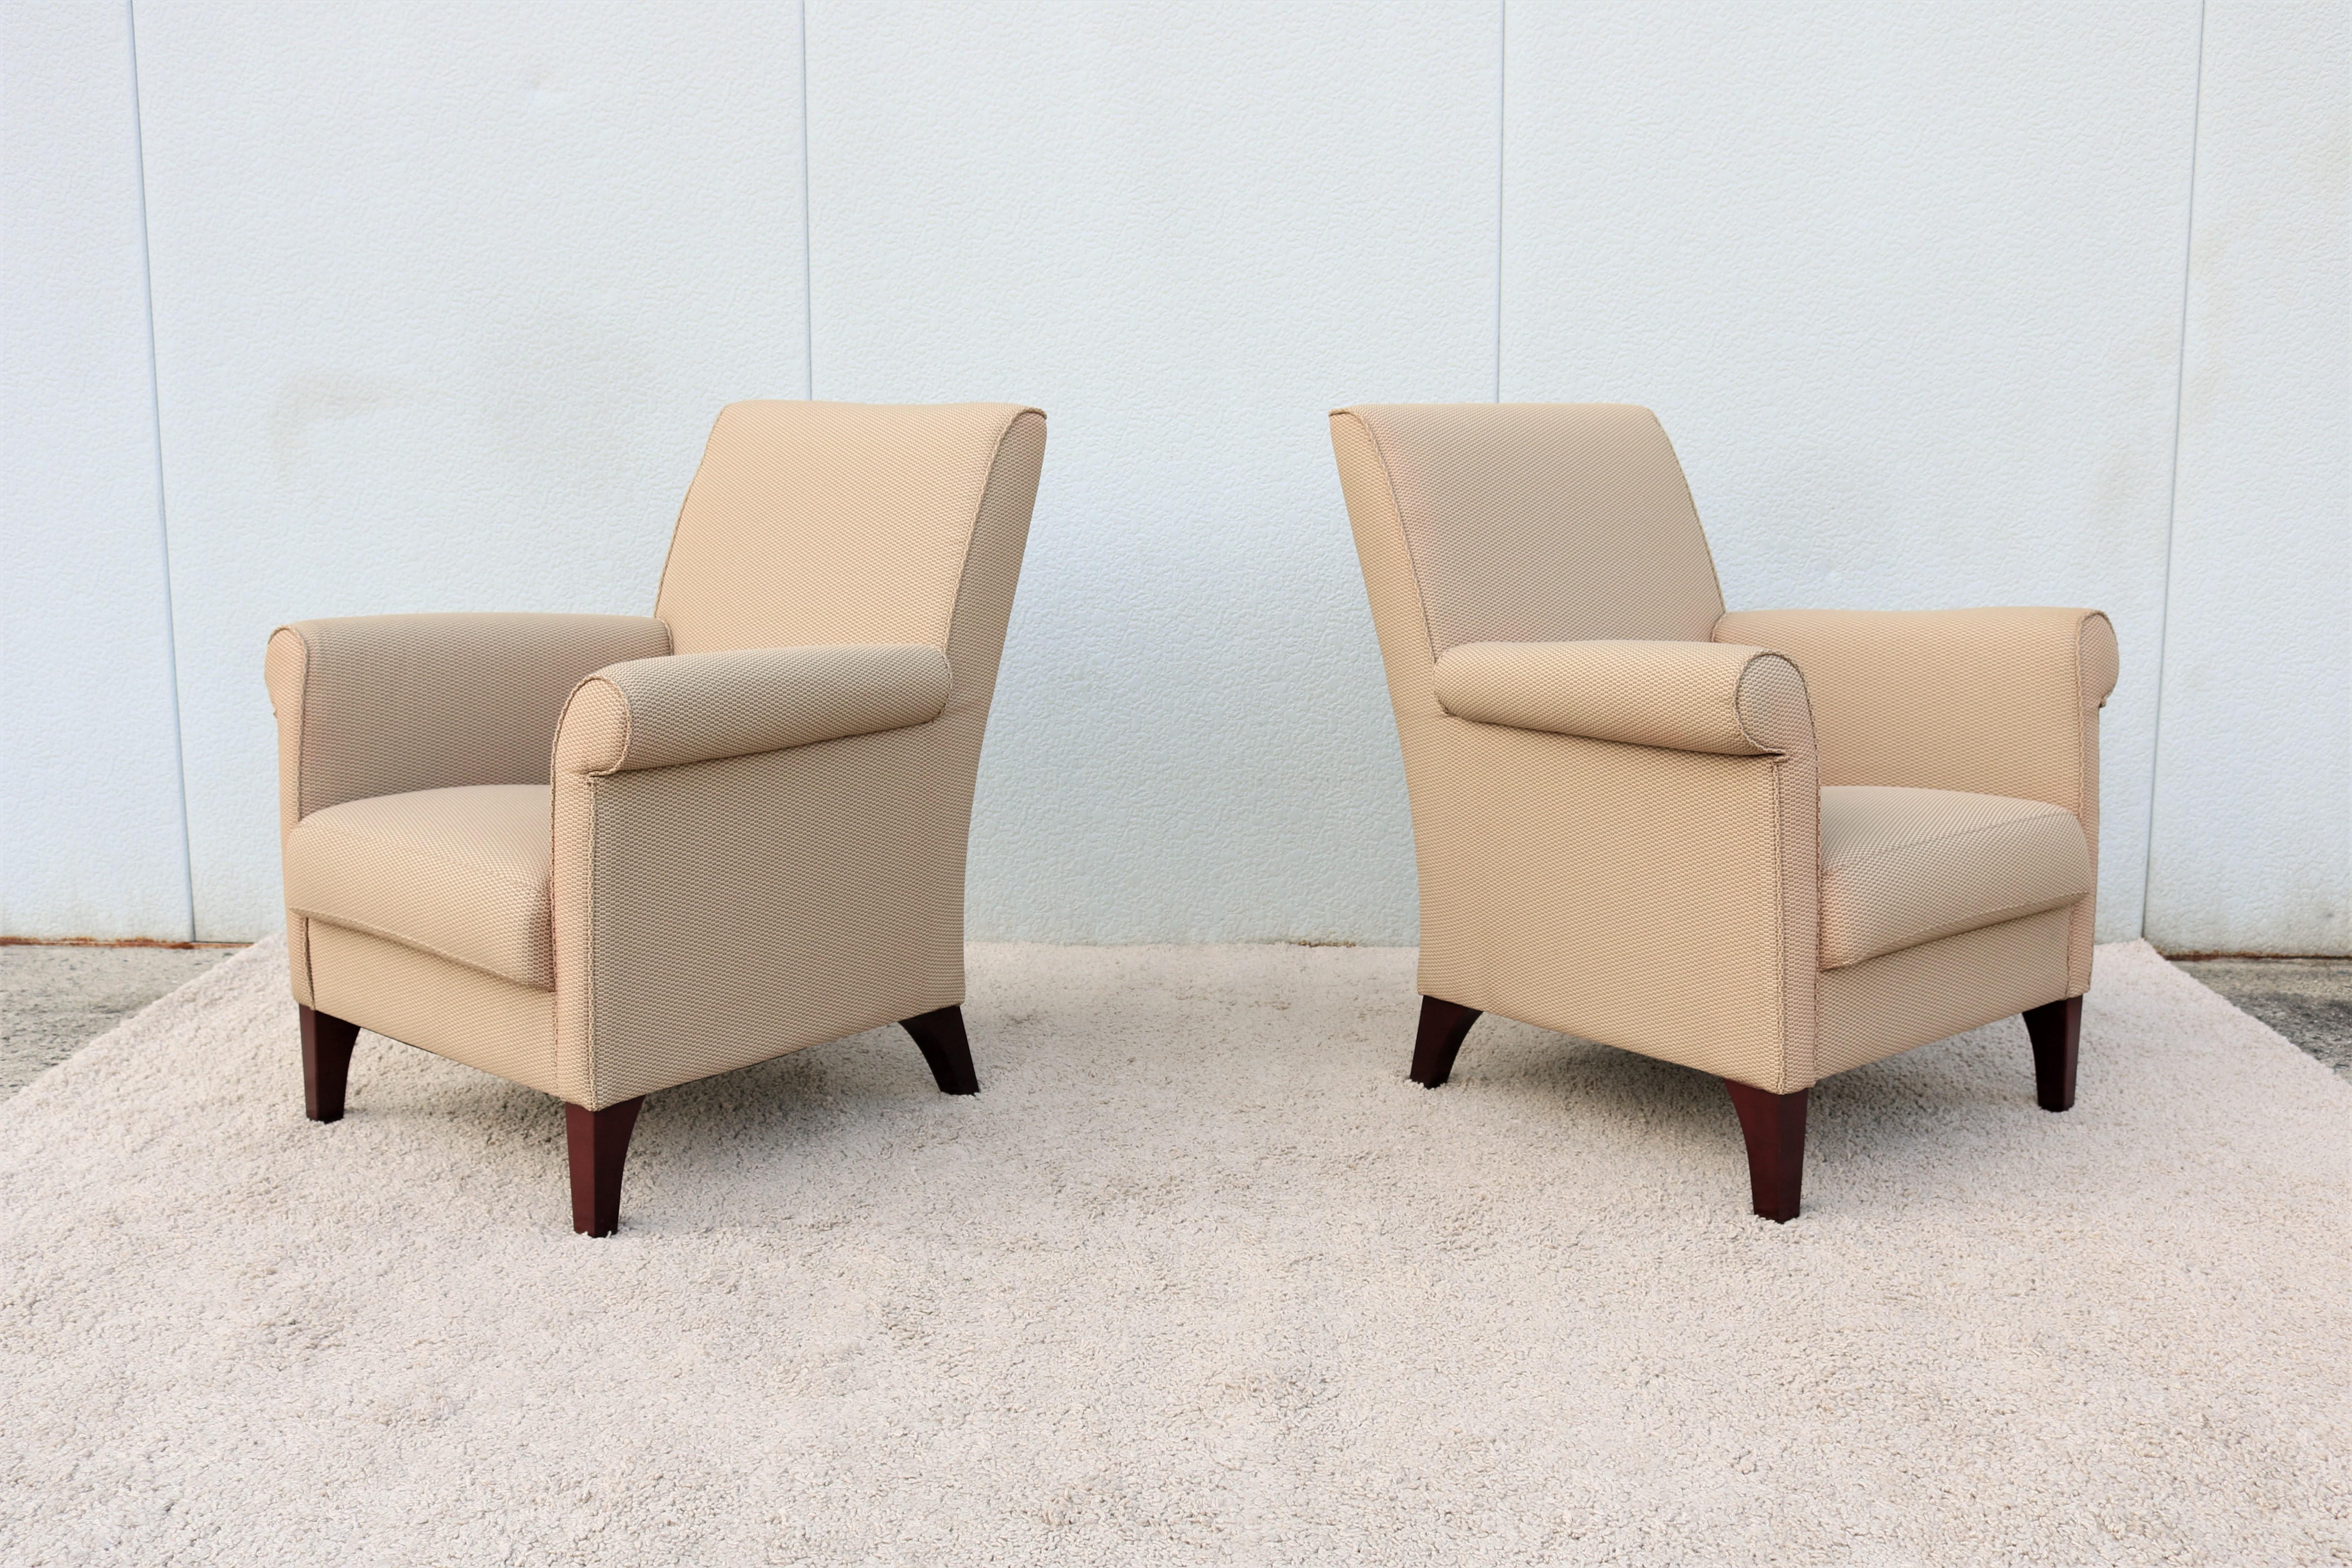 American Modern Contemporary Edgar Reuter for Coalesse Khaki Pasio Lounge Chairs, a Pair For Sale